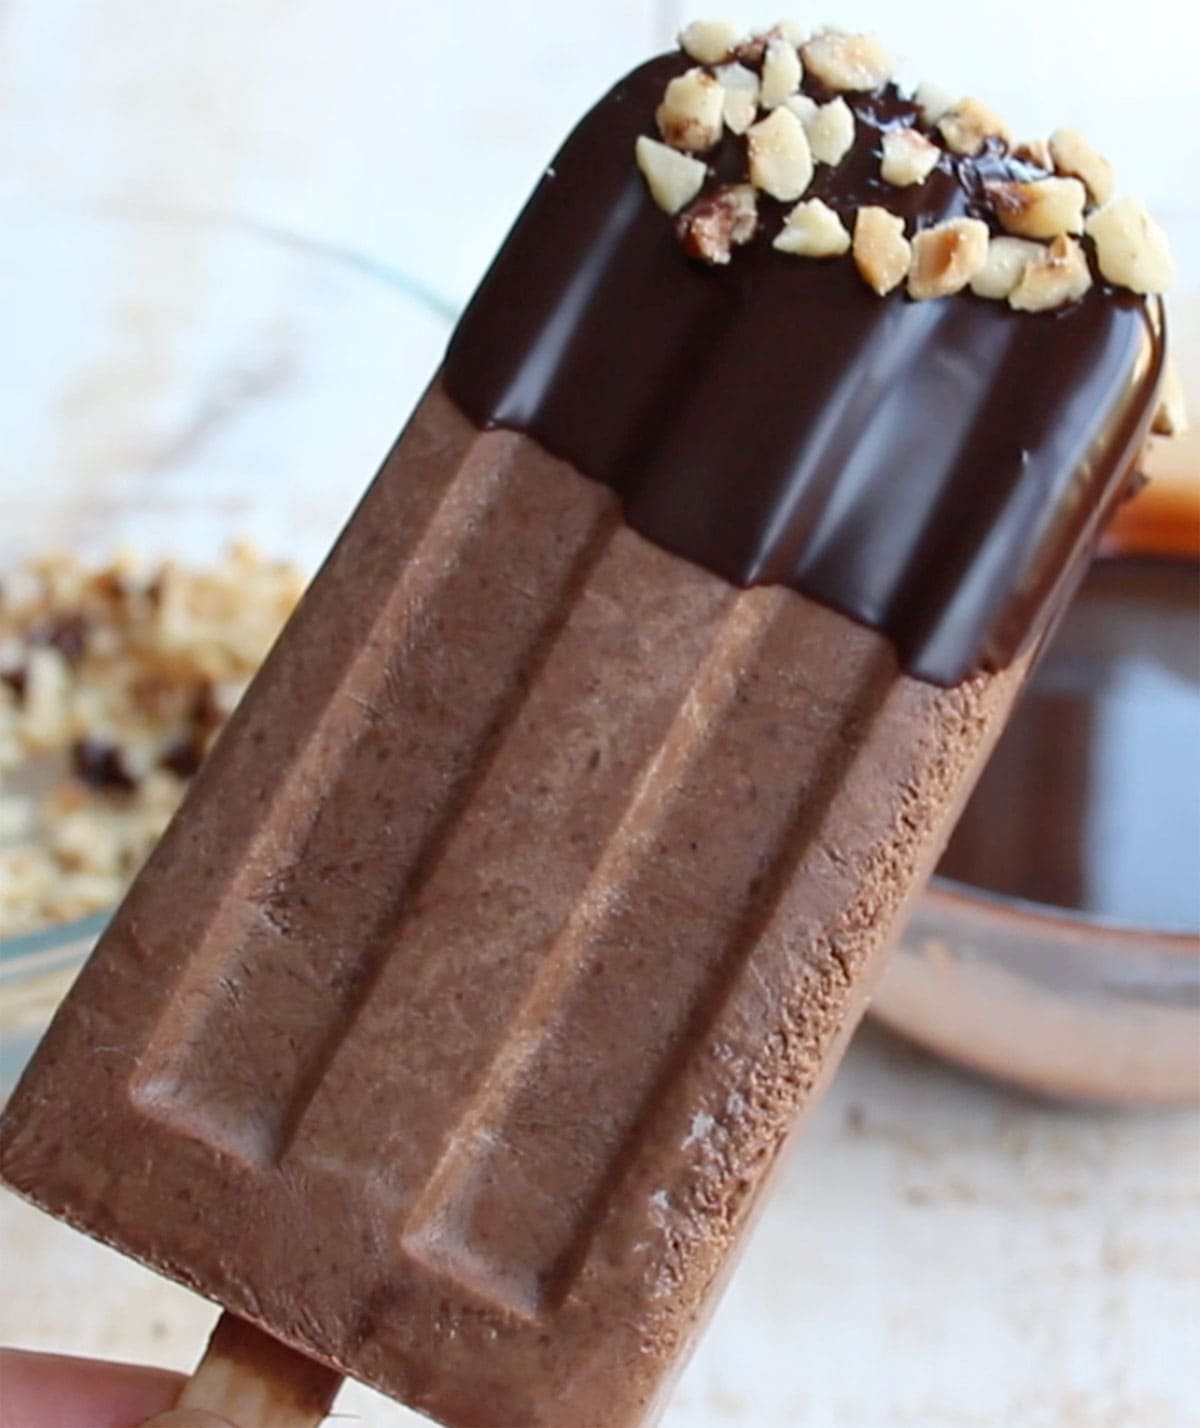 A sugar free chocolate fudgesicles topped with a chocolate coating and crushed hazelnuts.